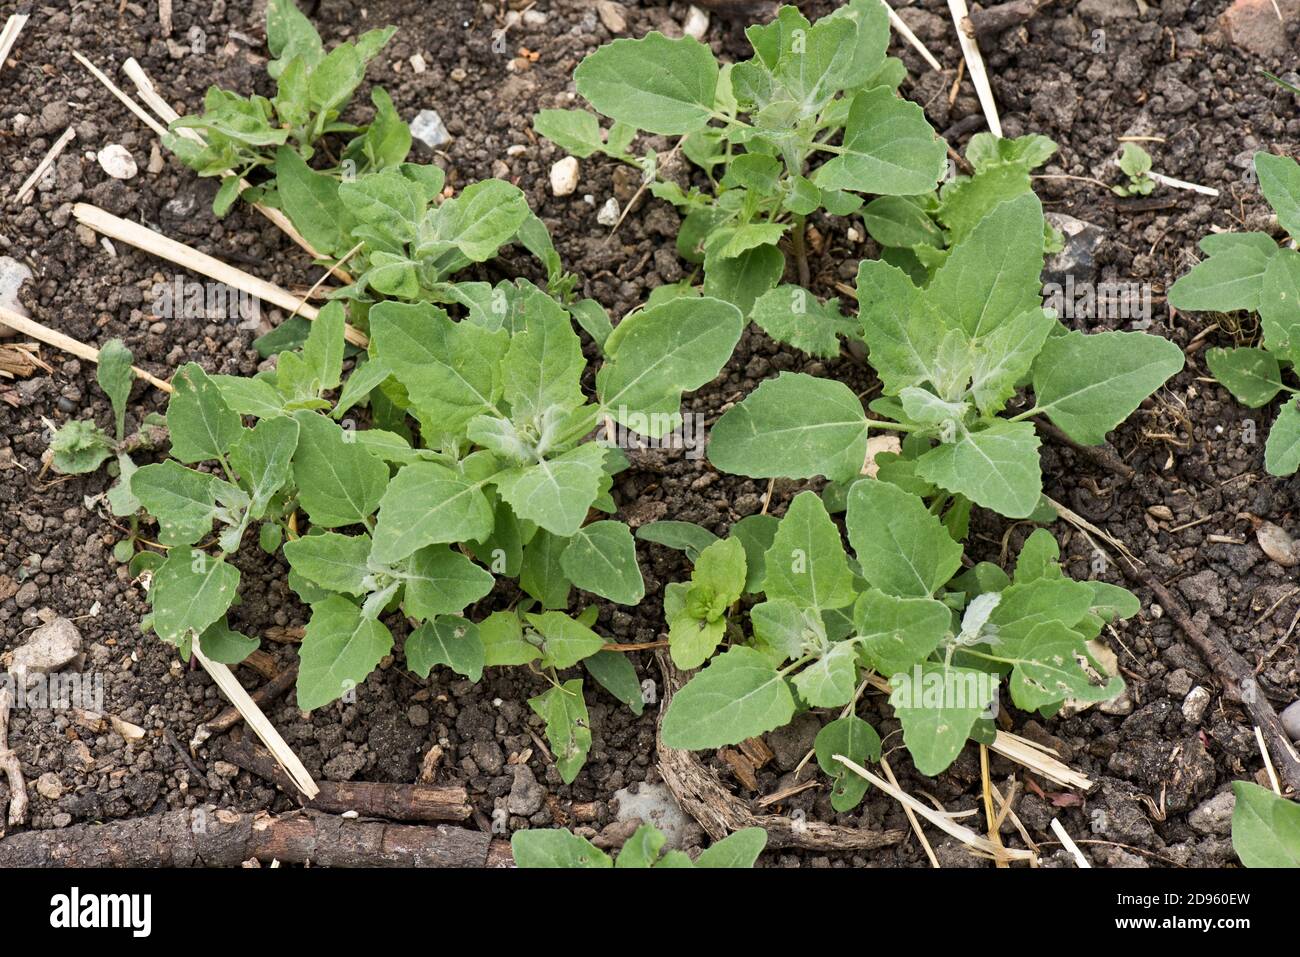 Fat hen (Chenopodium album) seedlings and young weed plants self-seeding in soil, Berkshire, June Stock Photo